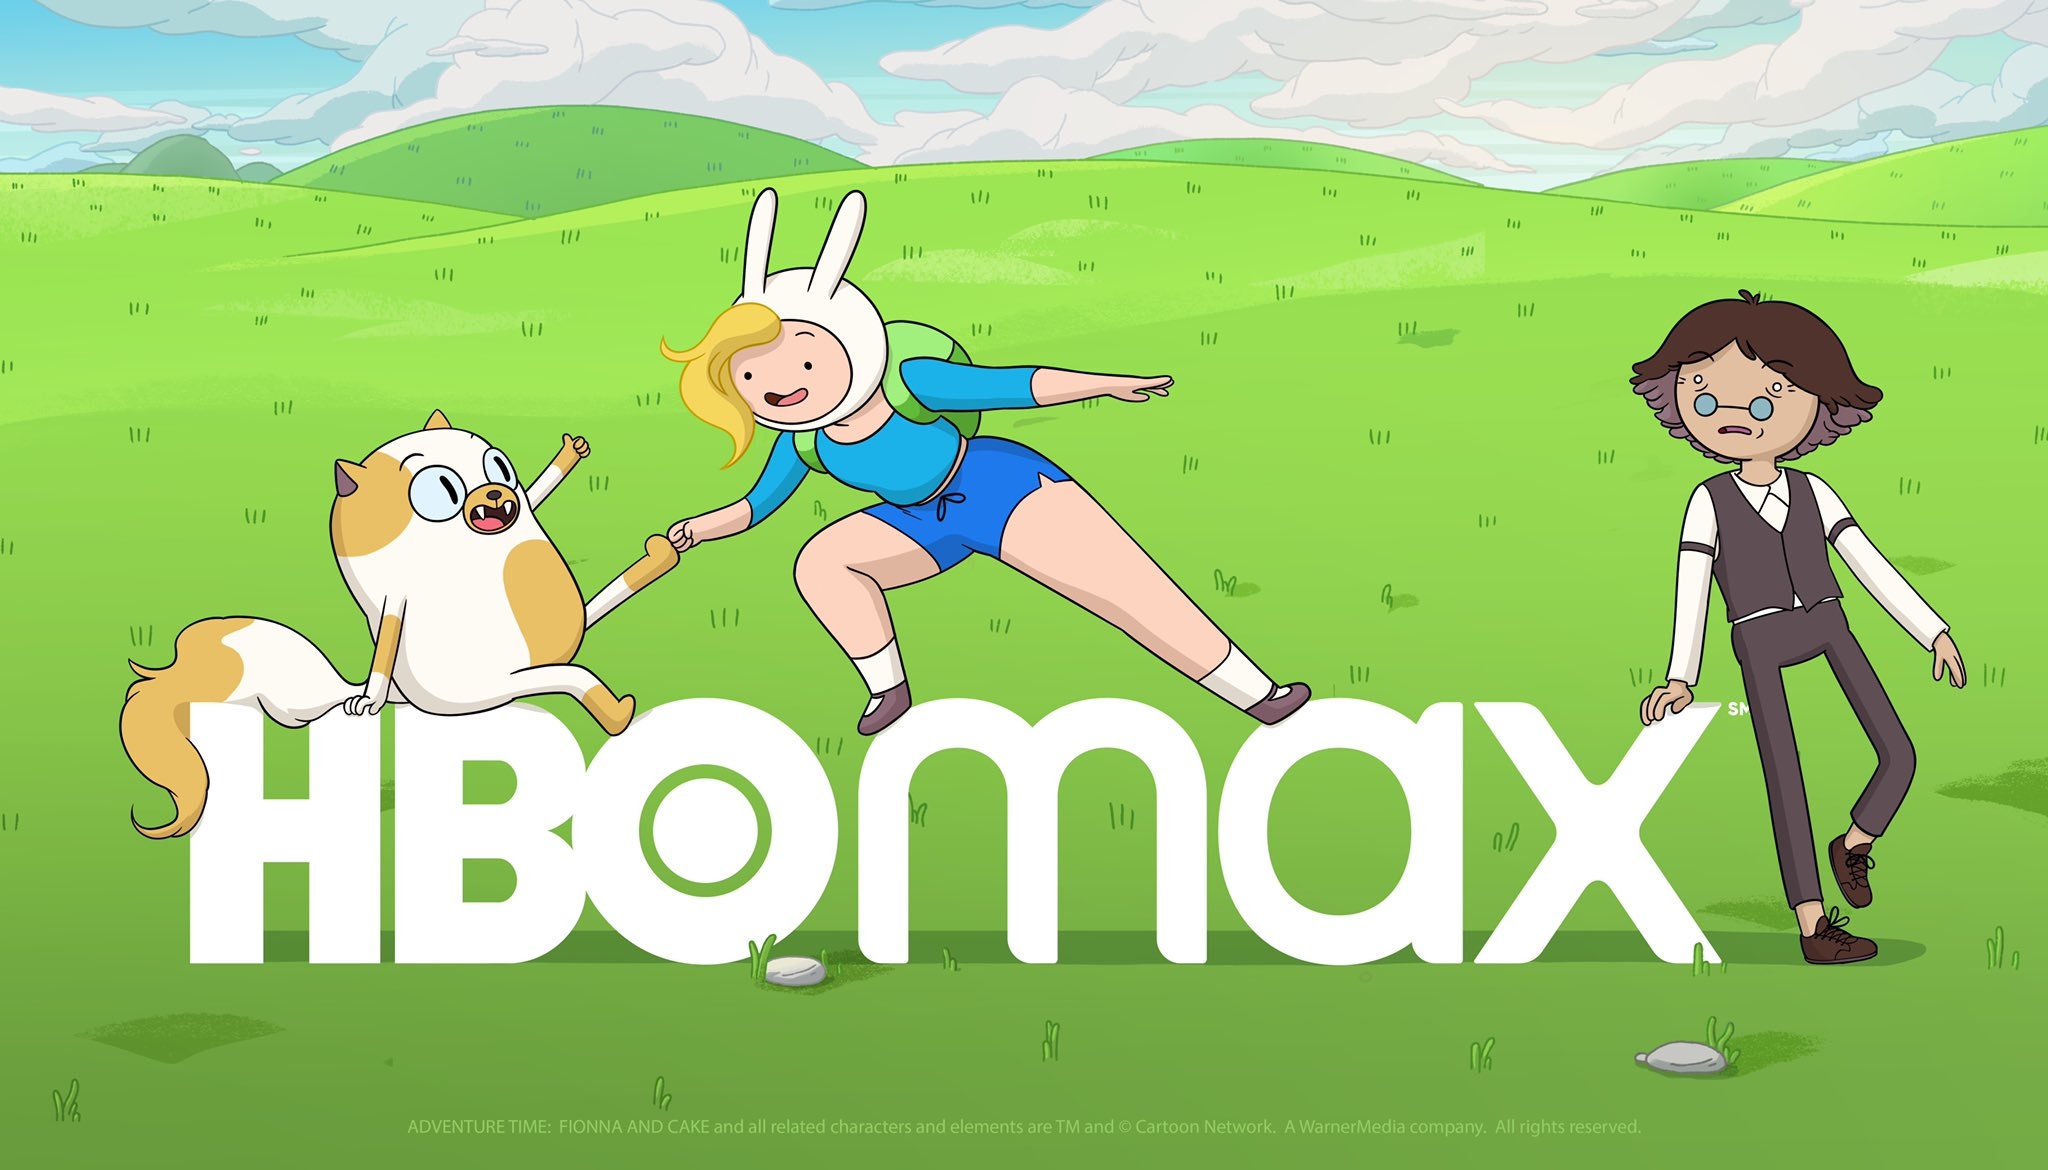 HBO Adventure Time Fionna & Cake 2022 Wallpaper, HD TV Series 4K Wallpapers,  Images, Photos and Background - Wallpapers Den